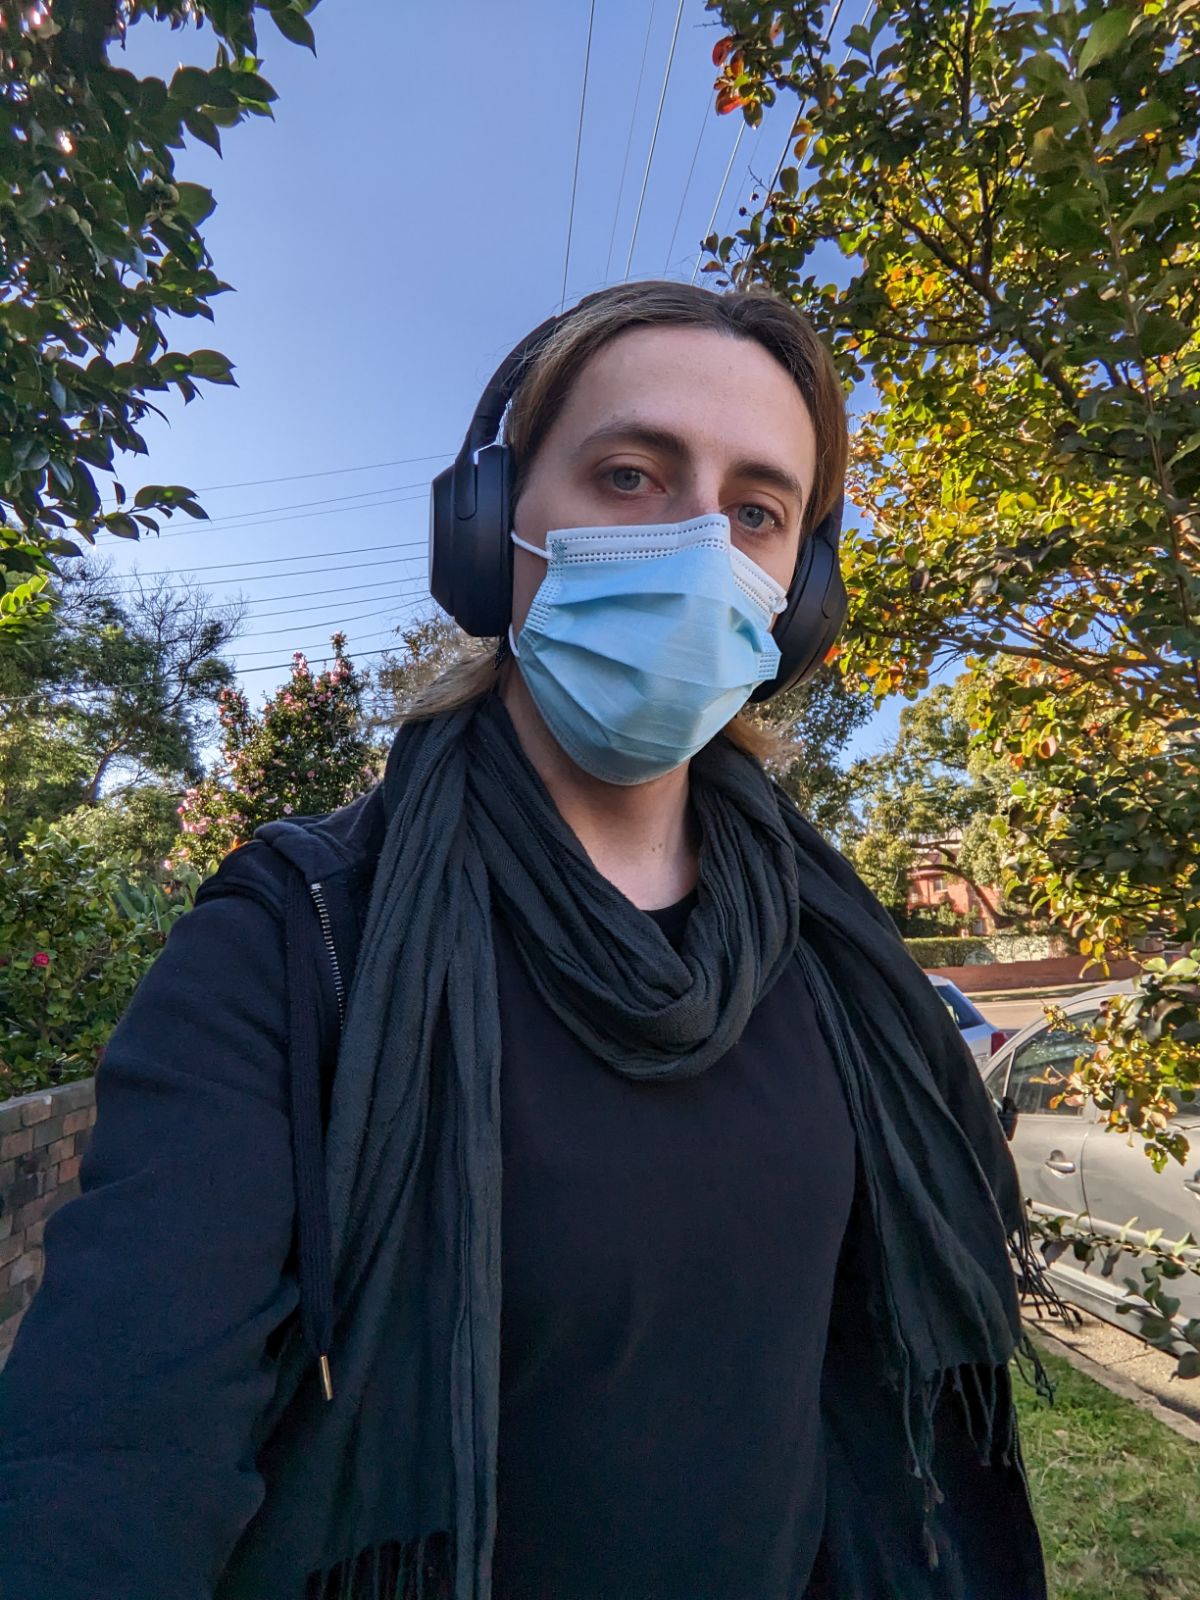 A woman is looking at the camera, wearing a mask, with trees and a blue sky in the background